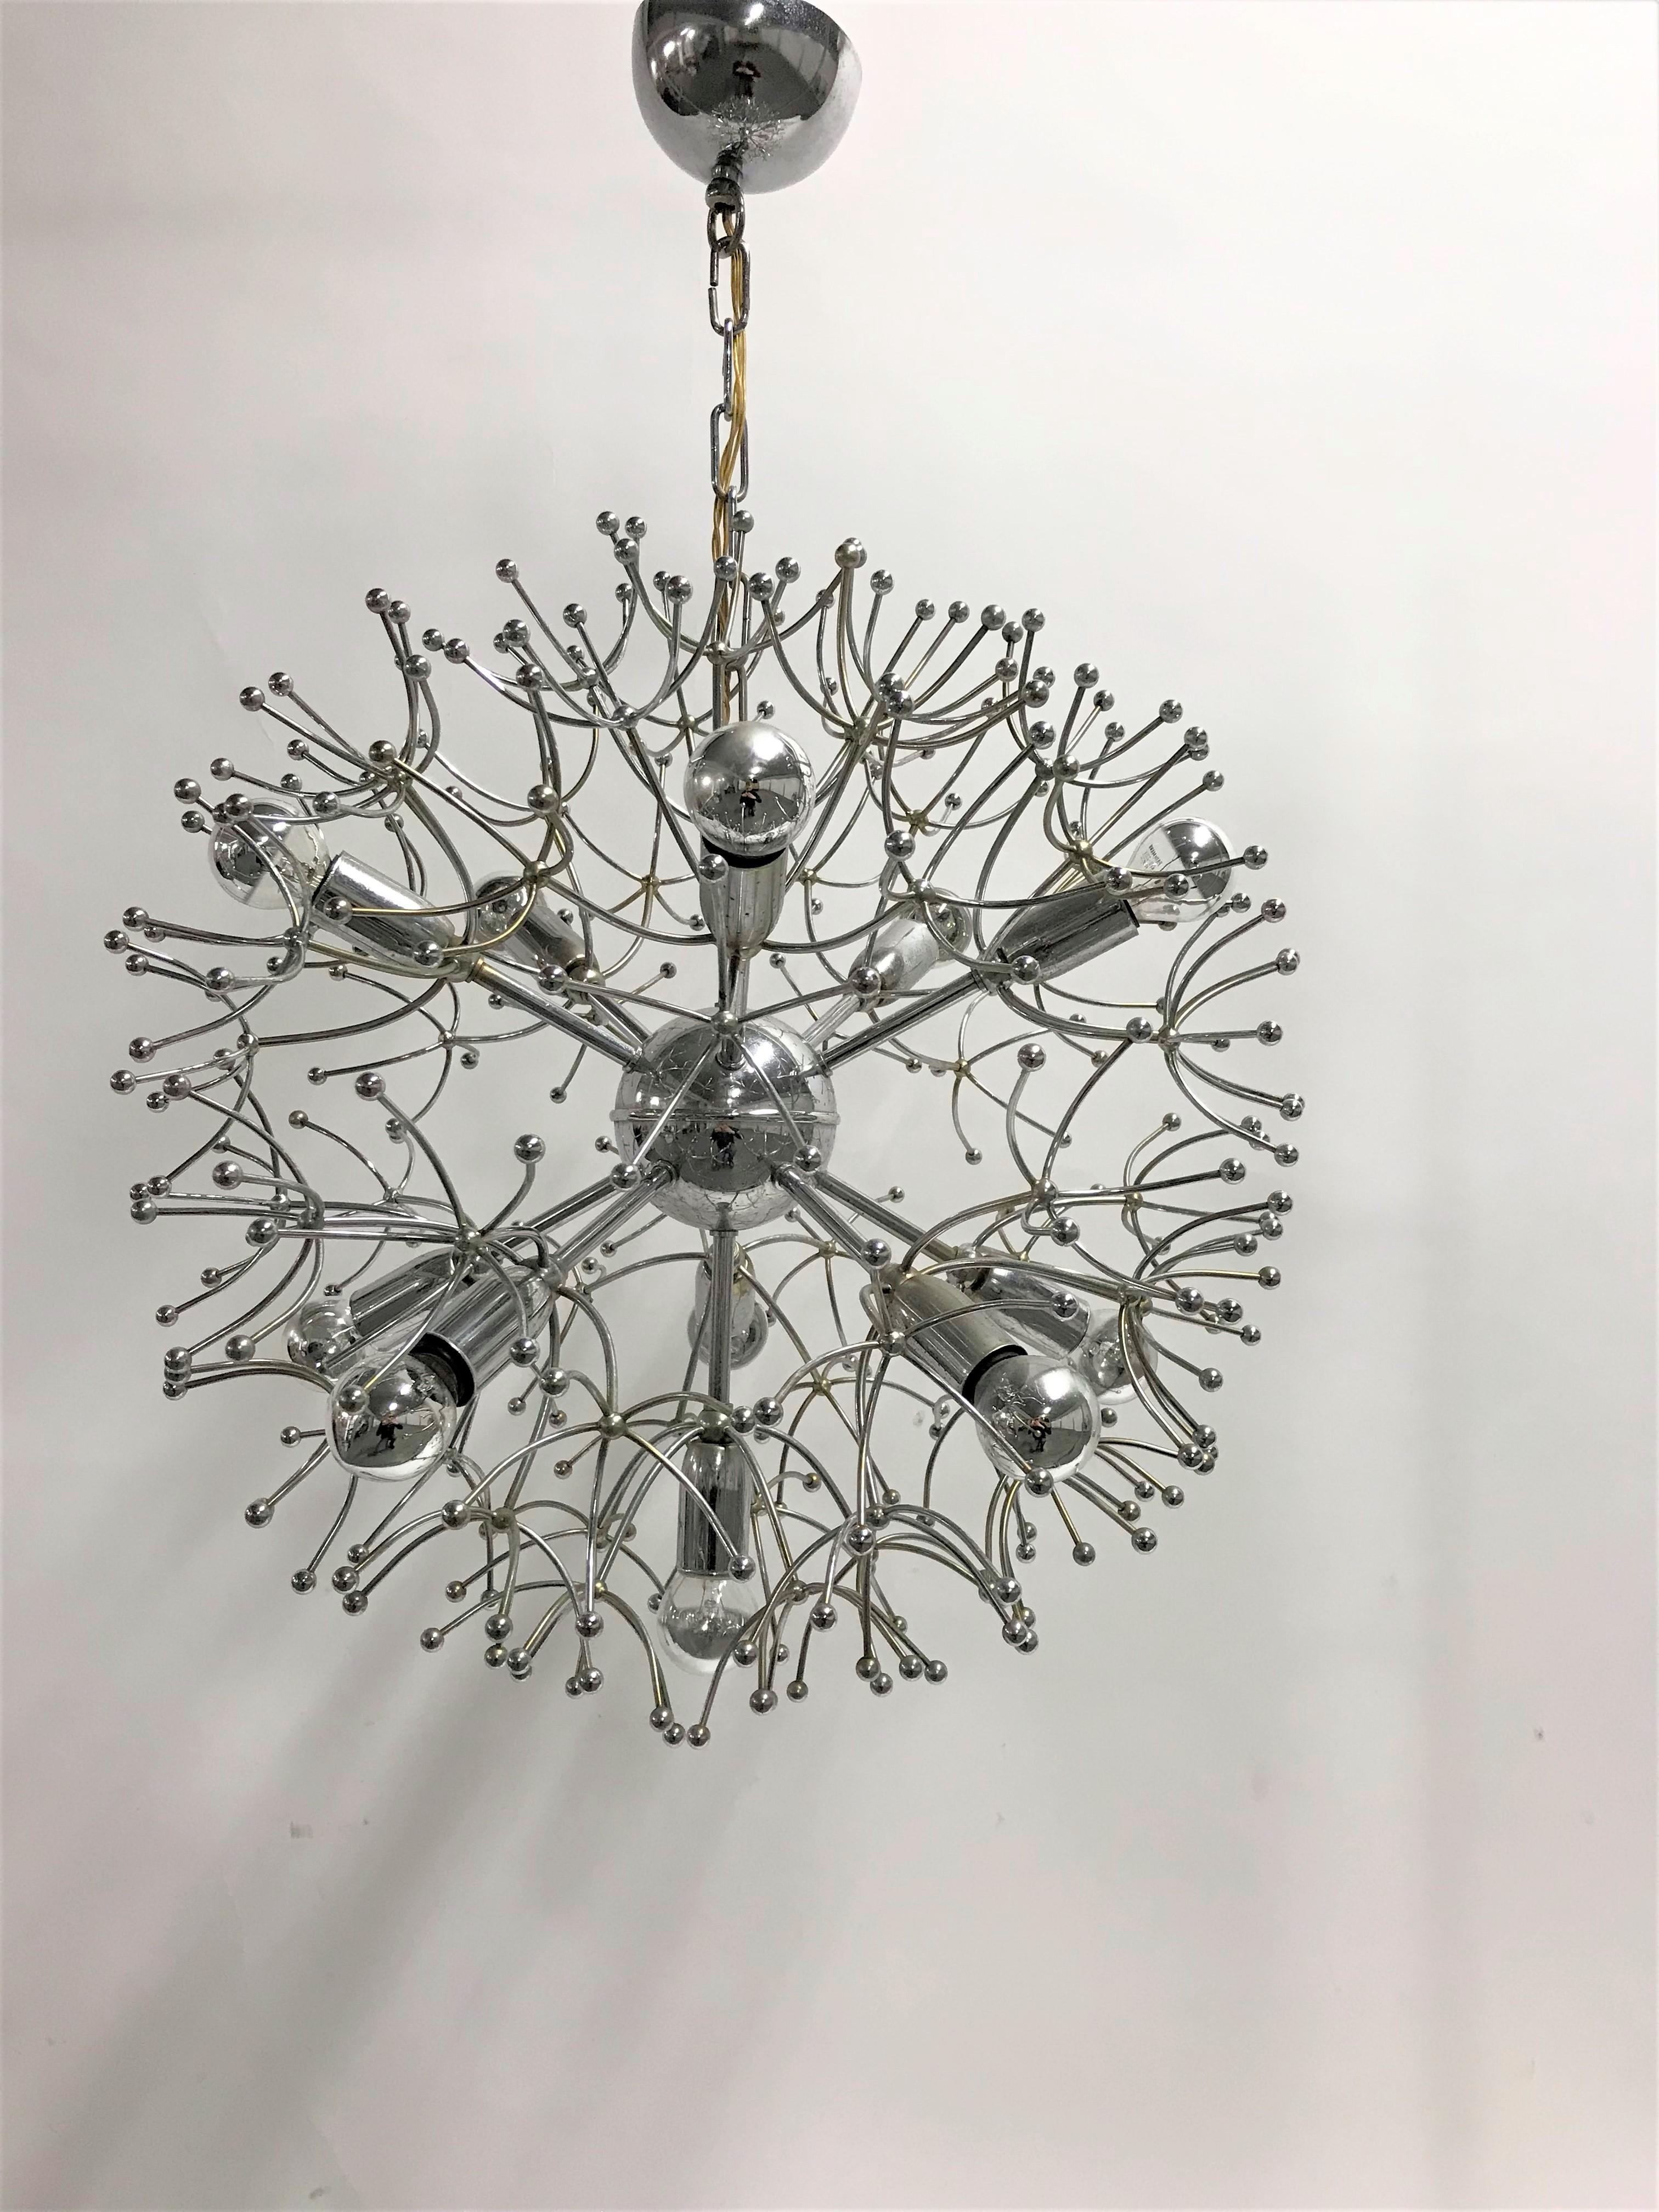 Midcentury chrome sputnik chandelier by Gaetano Sciolari featuring 11 lights.

The lamp emits a spectacular light.

Light patina visible.

Tested and ready for use with regular E14 light bulbs. The chandelier is compatible for all